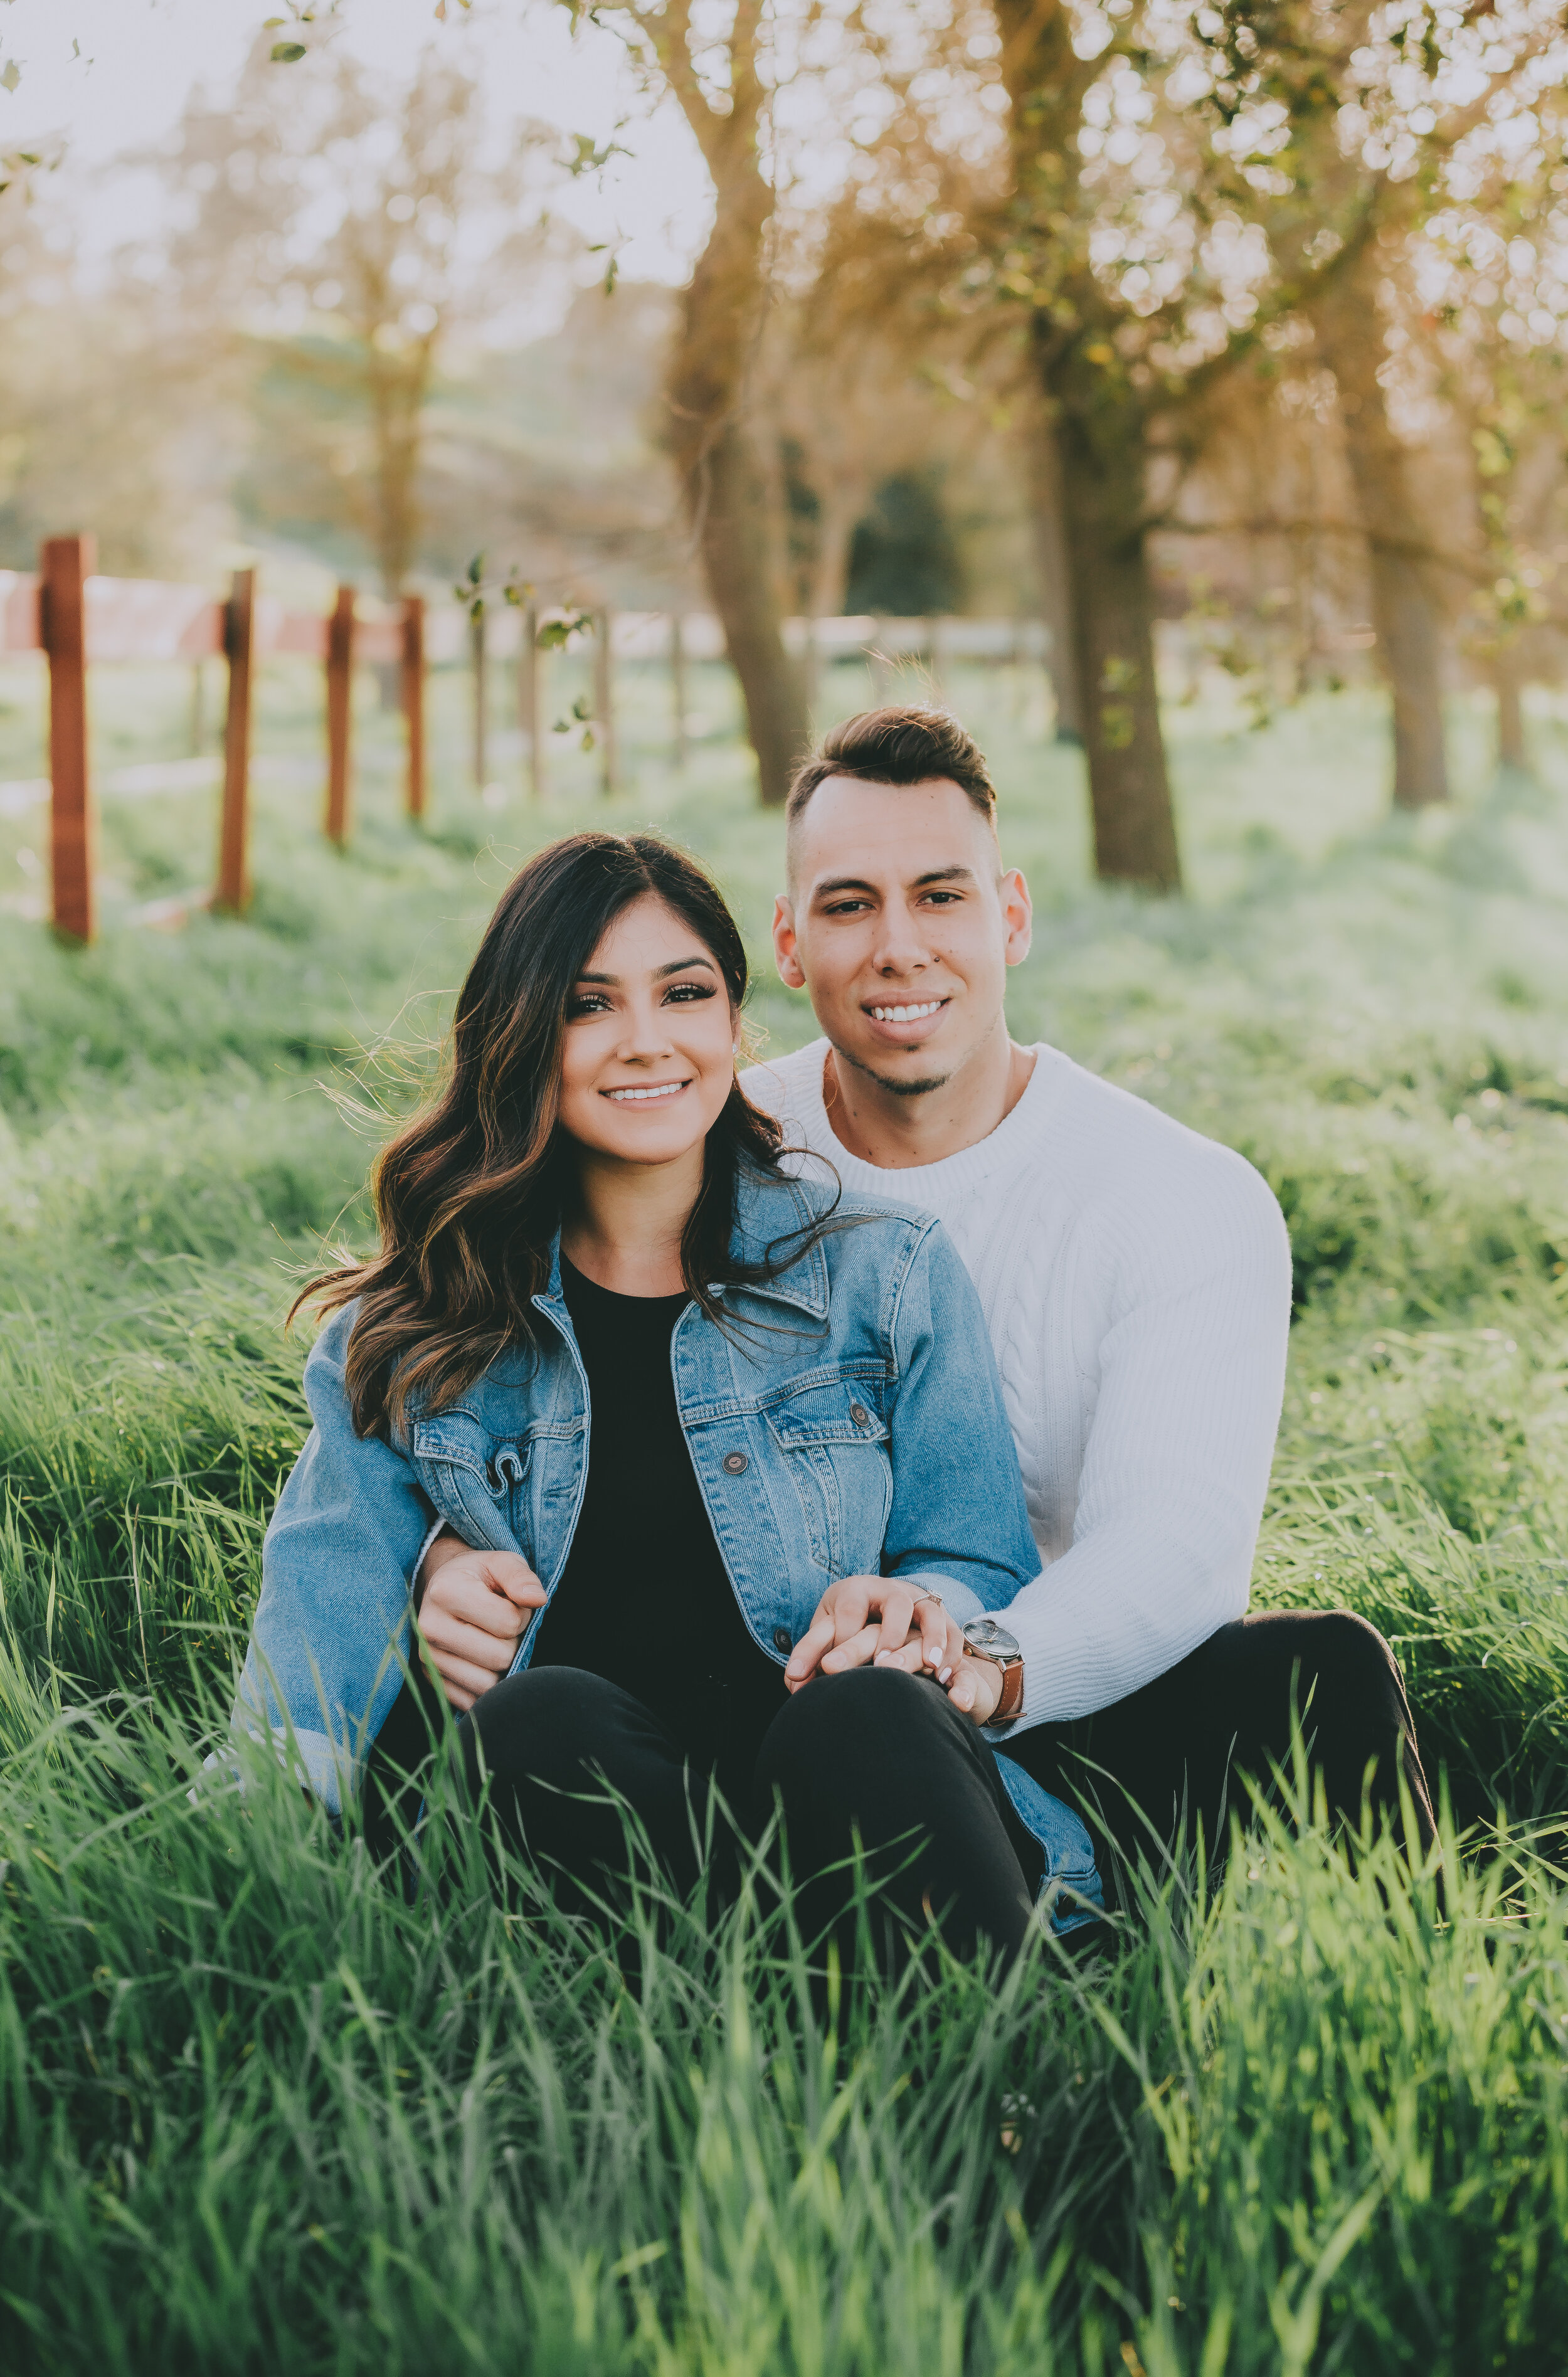 Fresno Engagament Photos - The Clausen Gallery - Samantha and Jesus-9.jpg